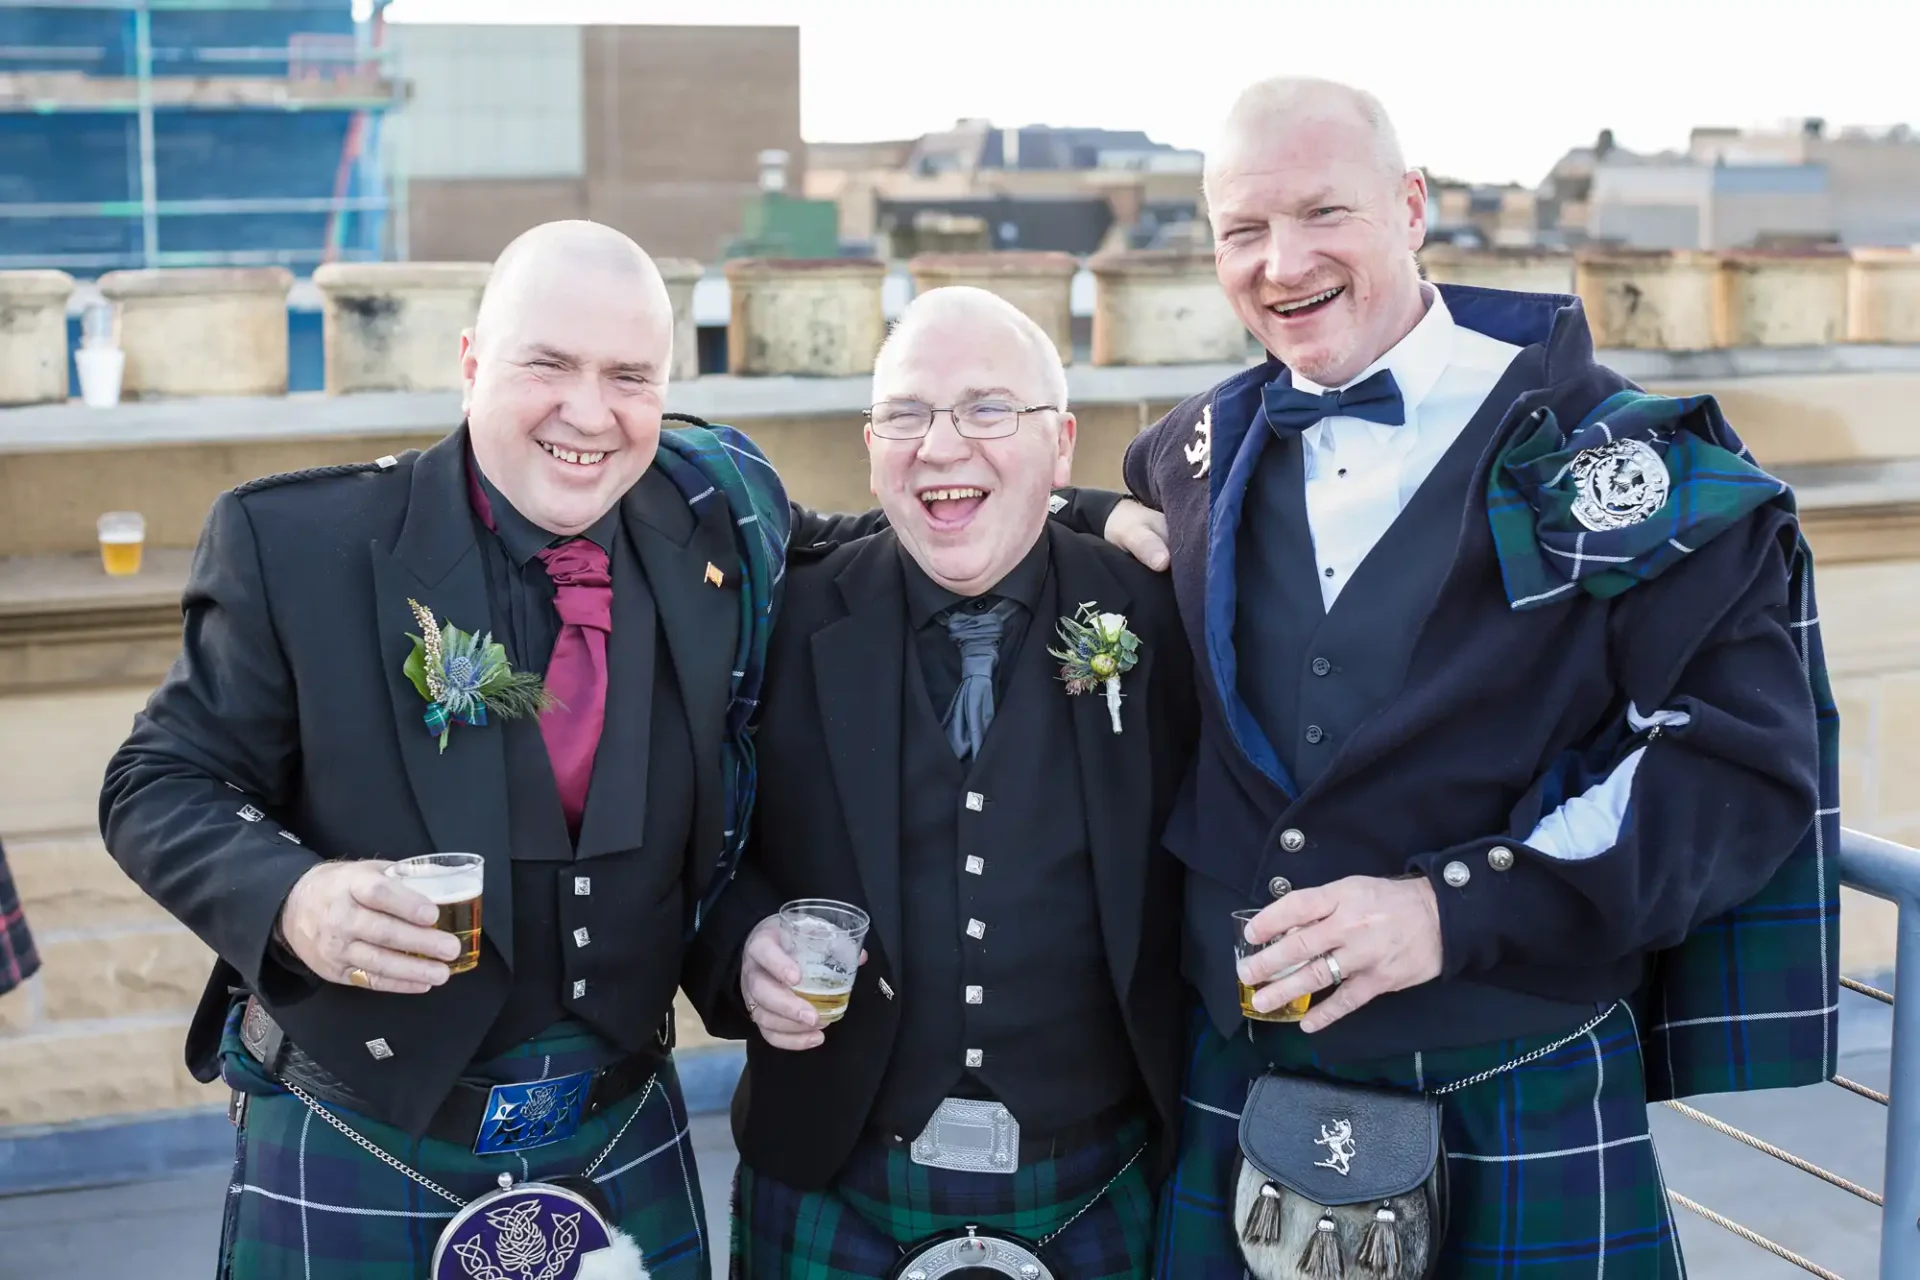 Three smiling men in traditional scottish attire holding drinks at an outdoor event.